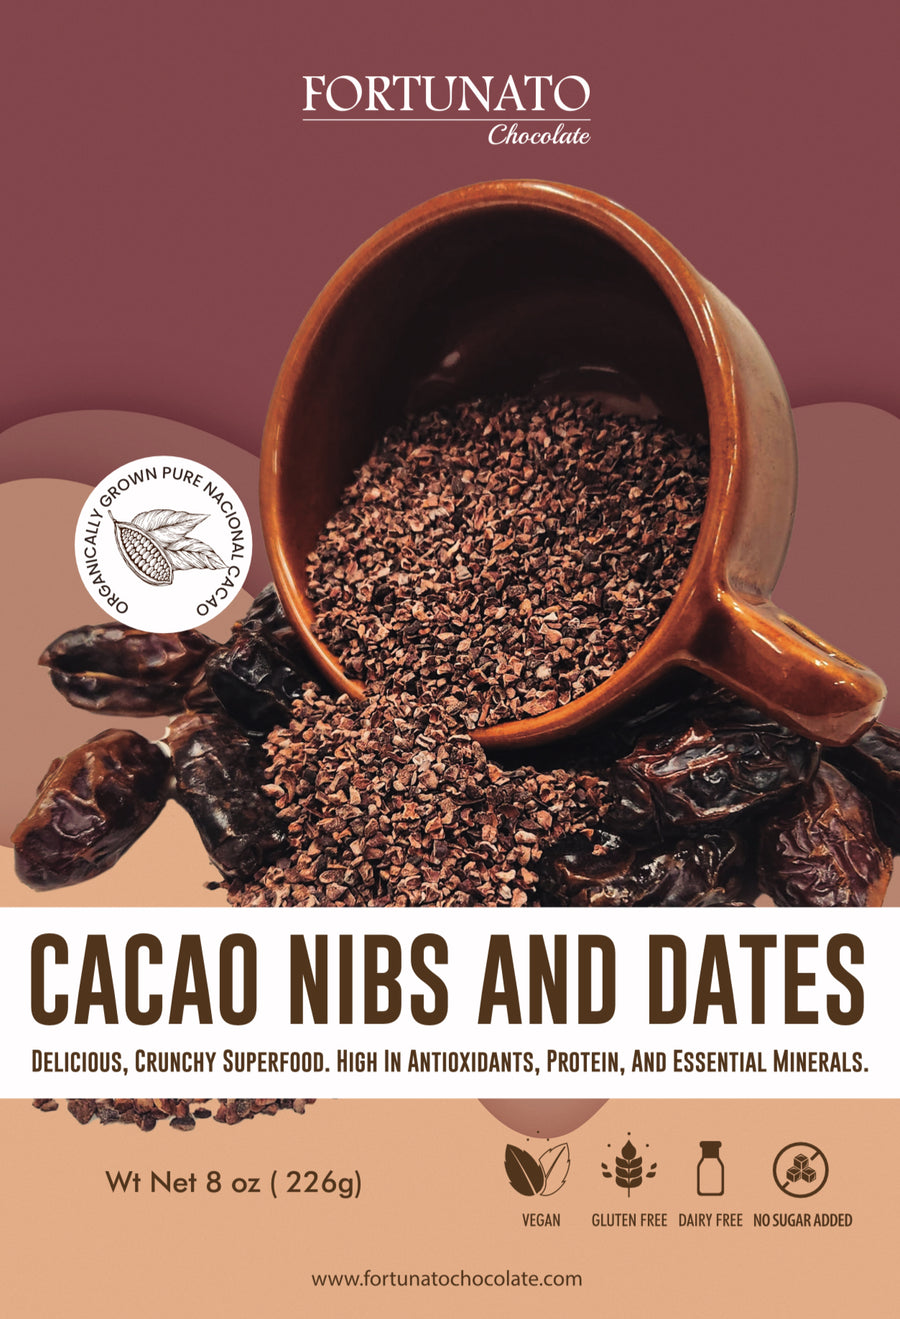 Fortunato Cacao Nibs & Dates - SHIPS PERFECTLY IN HOT WEATHER